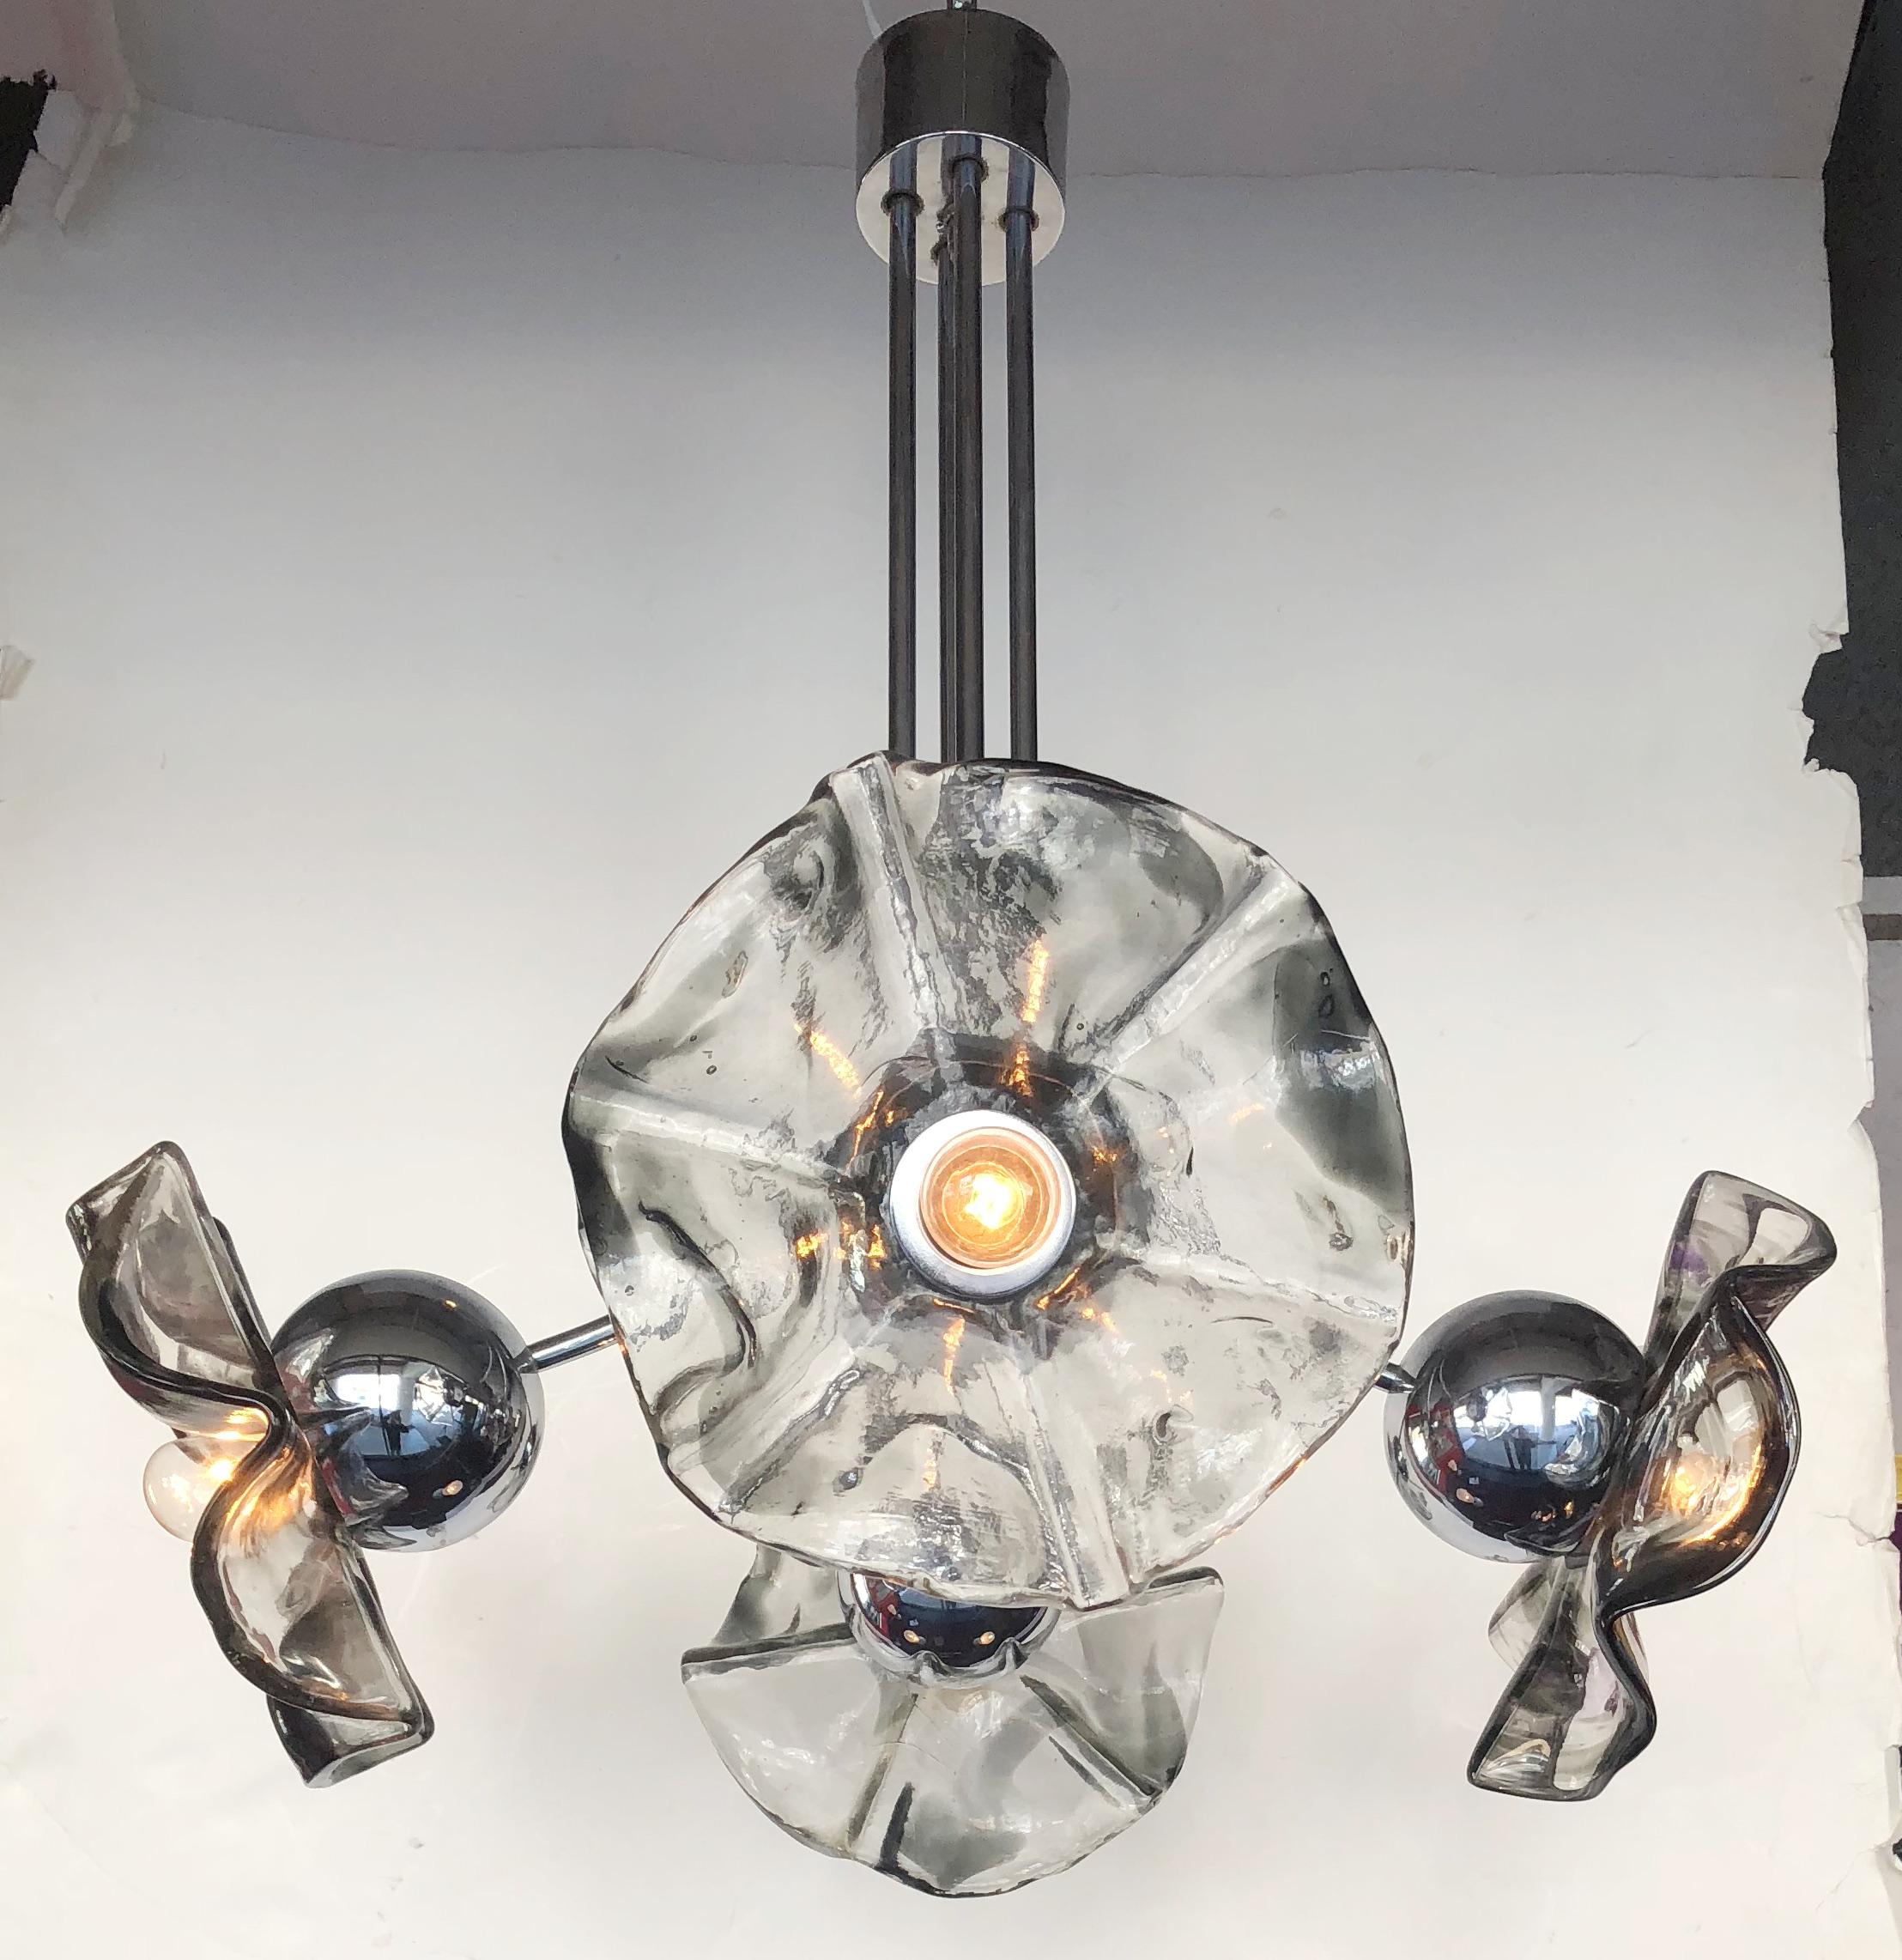 Italian vintage pendant chandelier with four hand blown Murano glass flowers in smoky colors, mounted on chrome frame / Designed by Mazzega circa 1960's / Made in Italy
4 lights / E26 or E27 type / max 60W each
Diameter: 29 inches / Height: 33